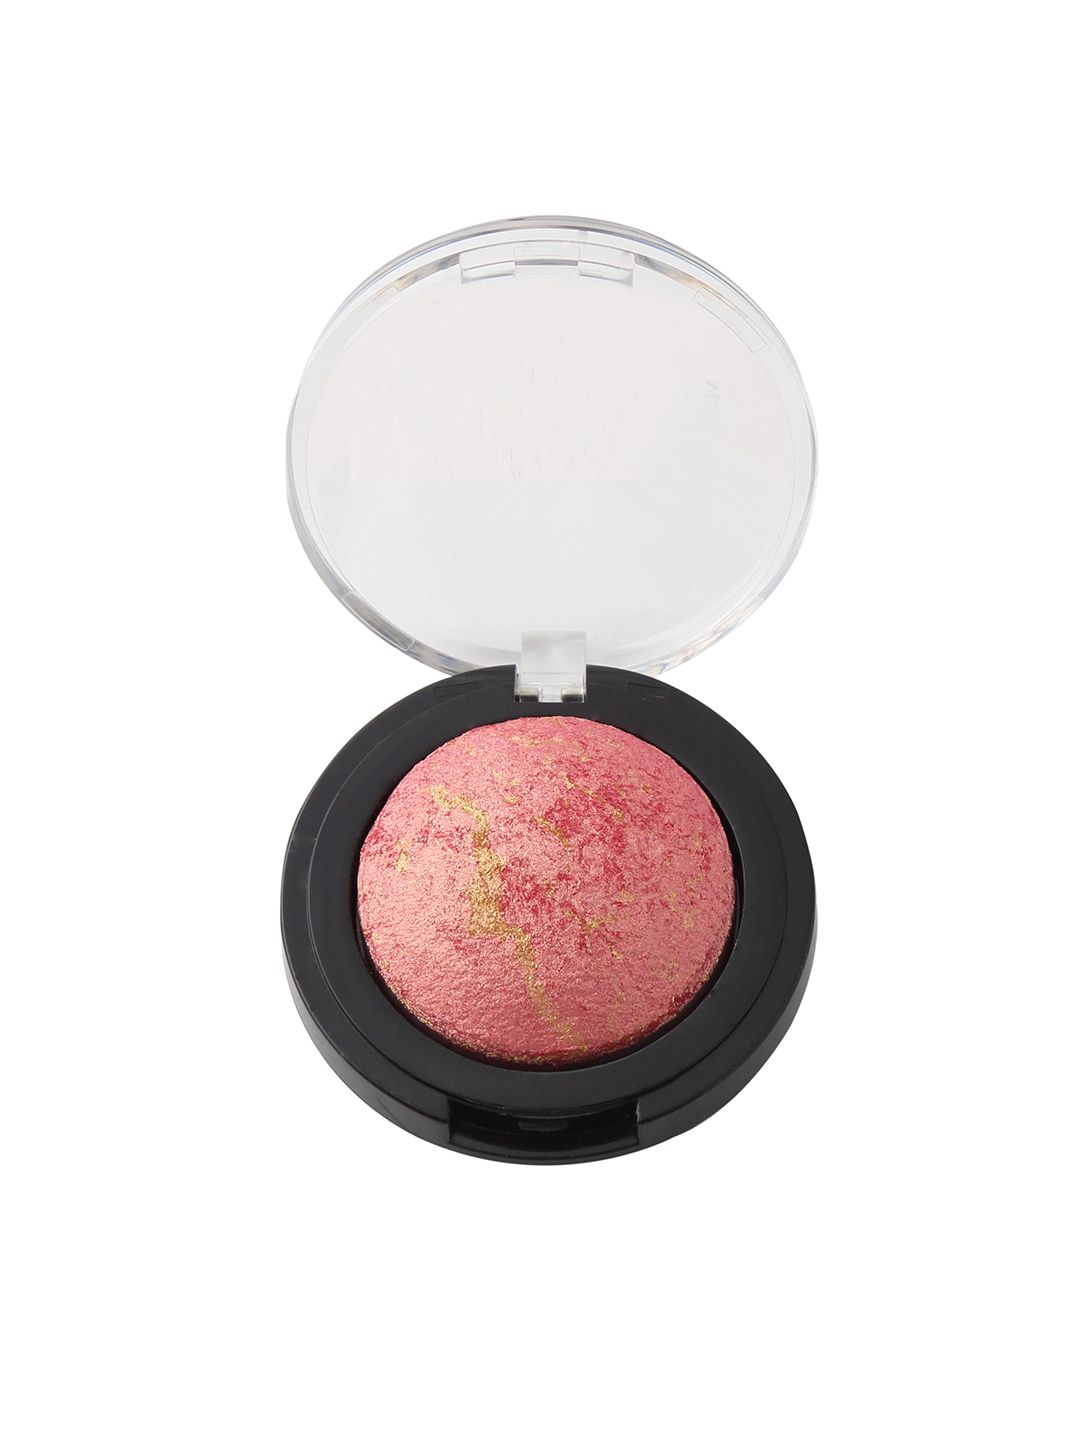 Miss Claire Baked Eyeshadow Duo ECP-506 3.5 g Price in India